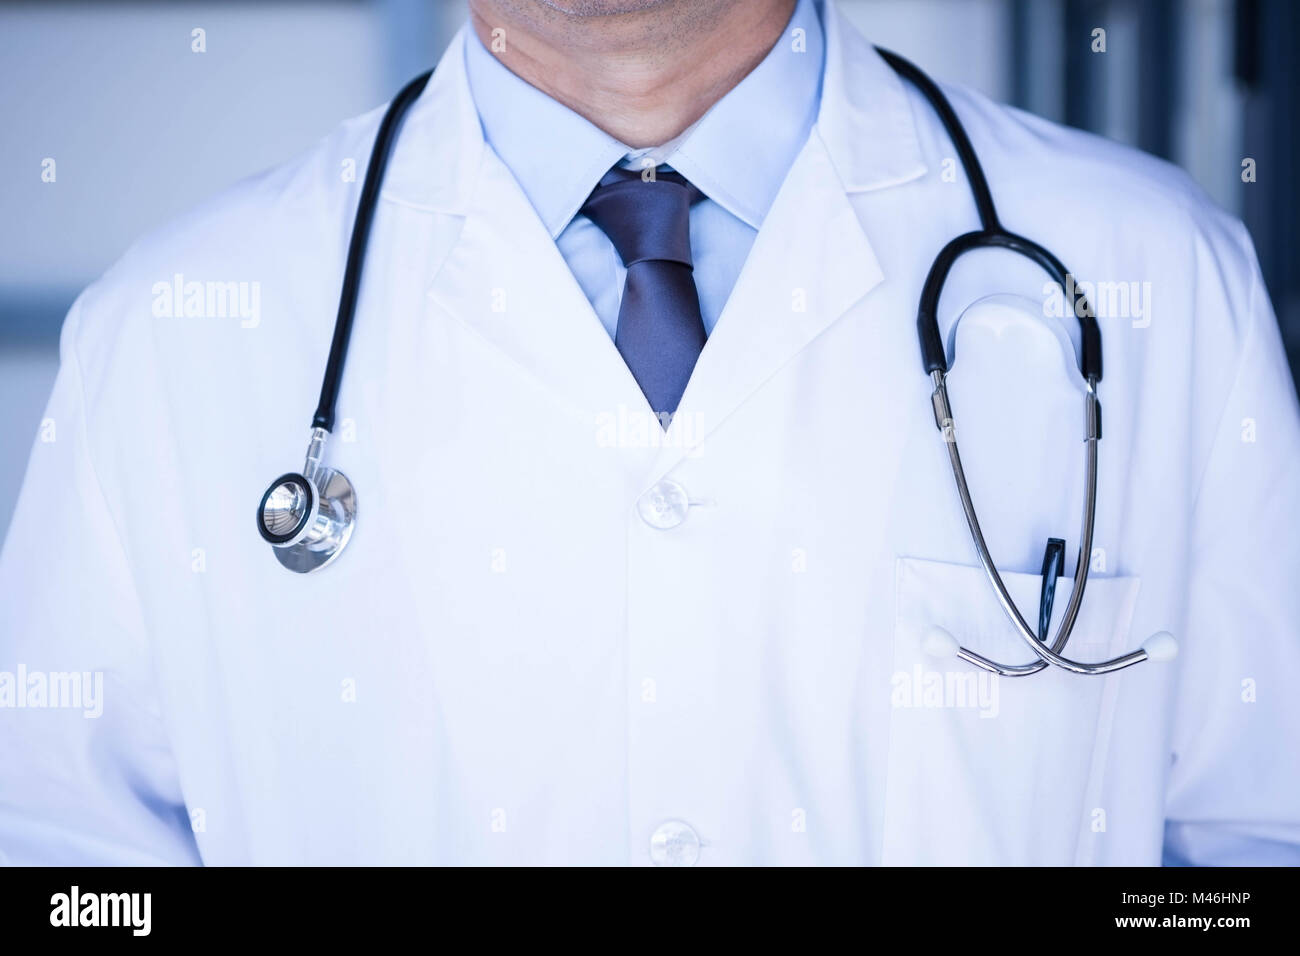 Male Doctor In Lab Coat Wearing Stethoscope Around Neck Stock Photo Alamy